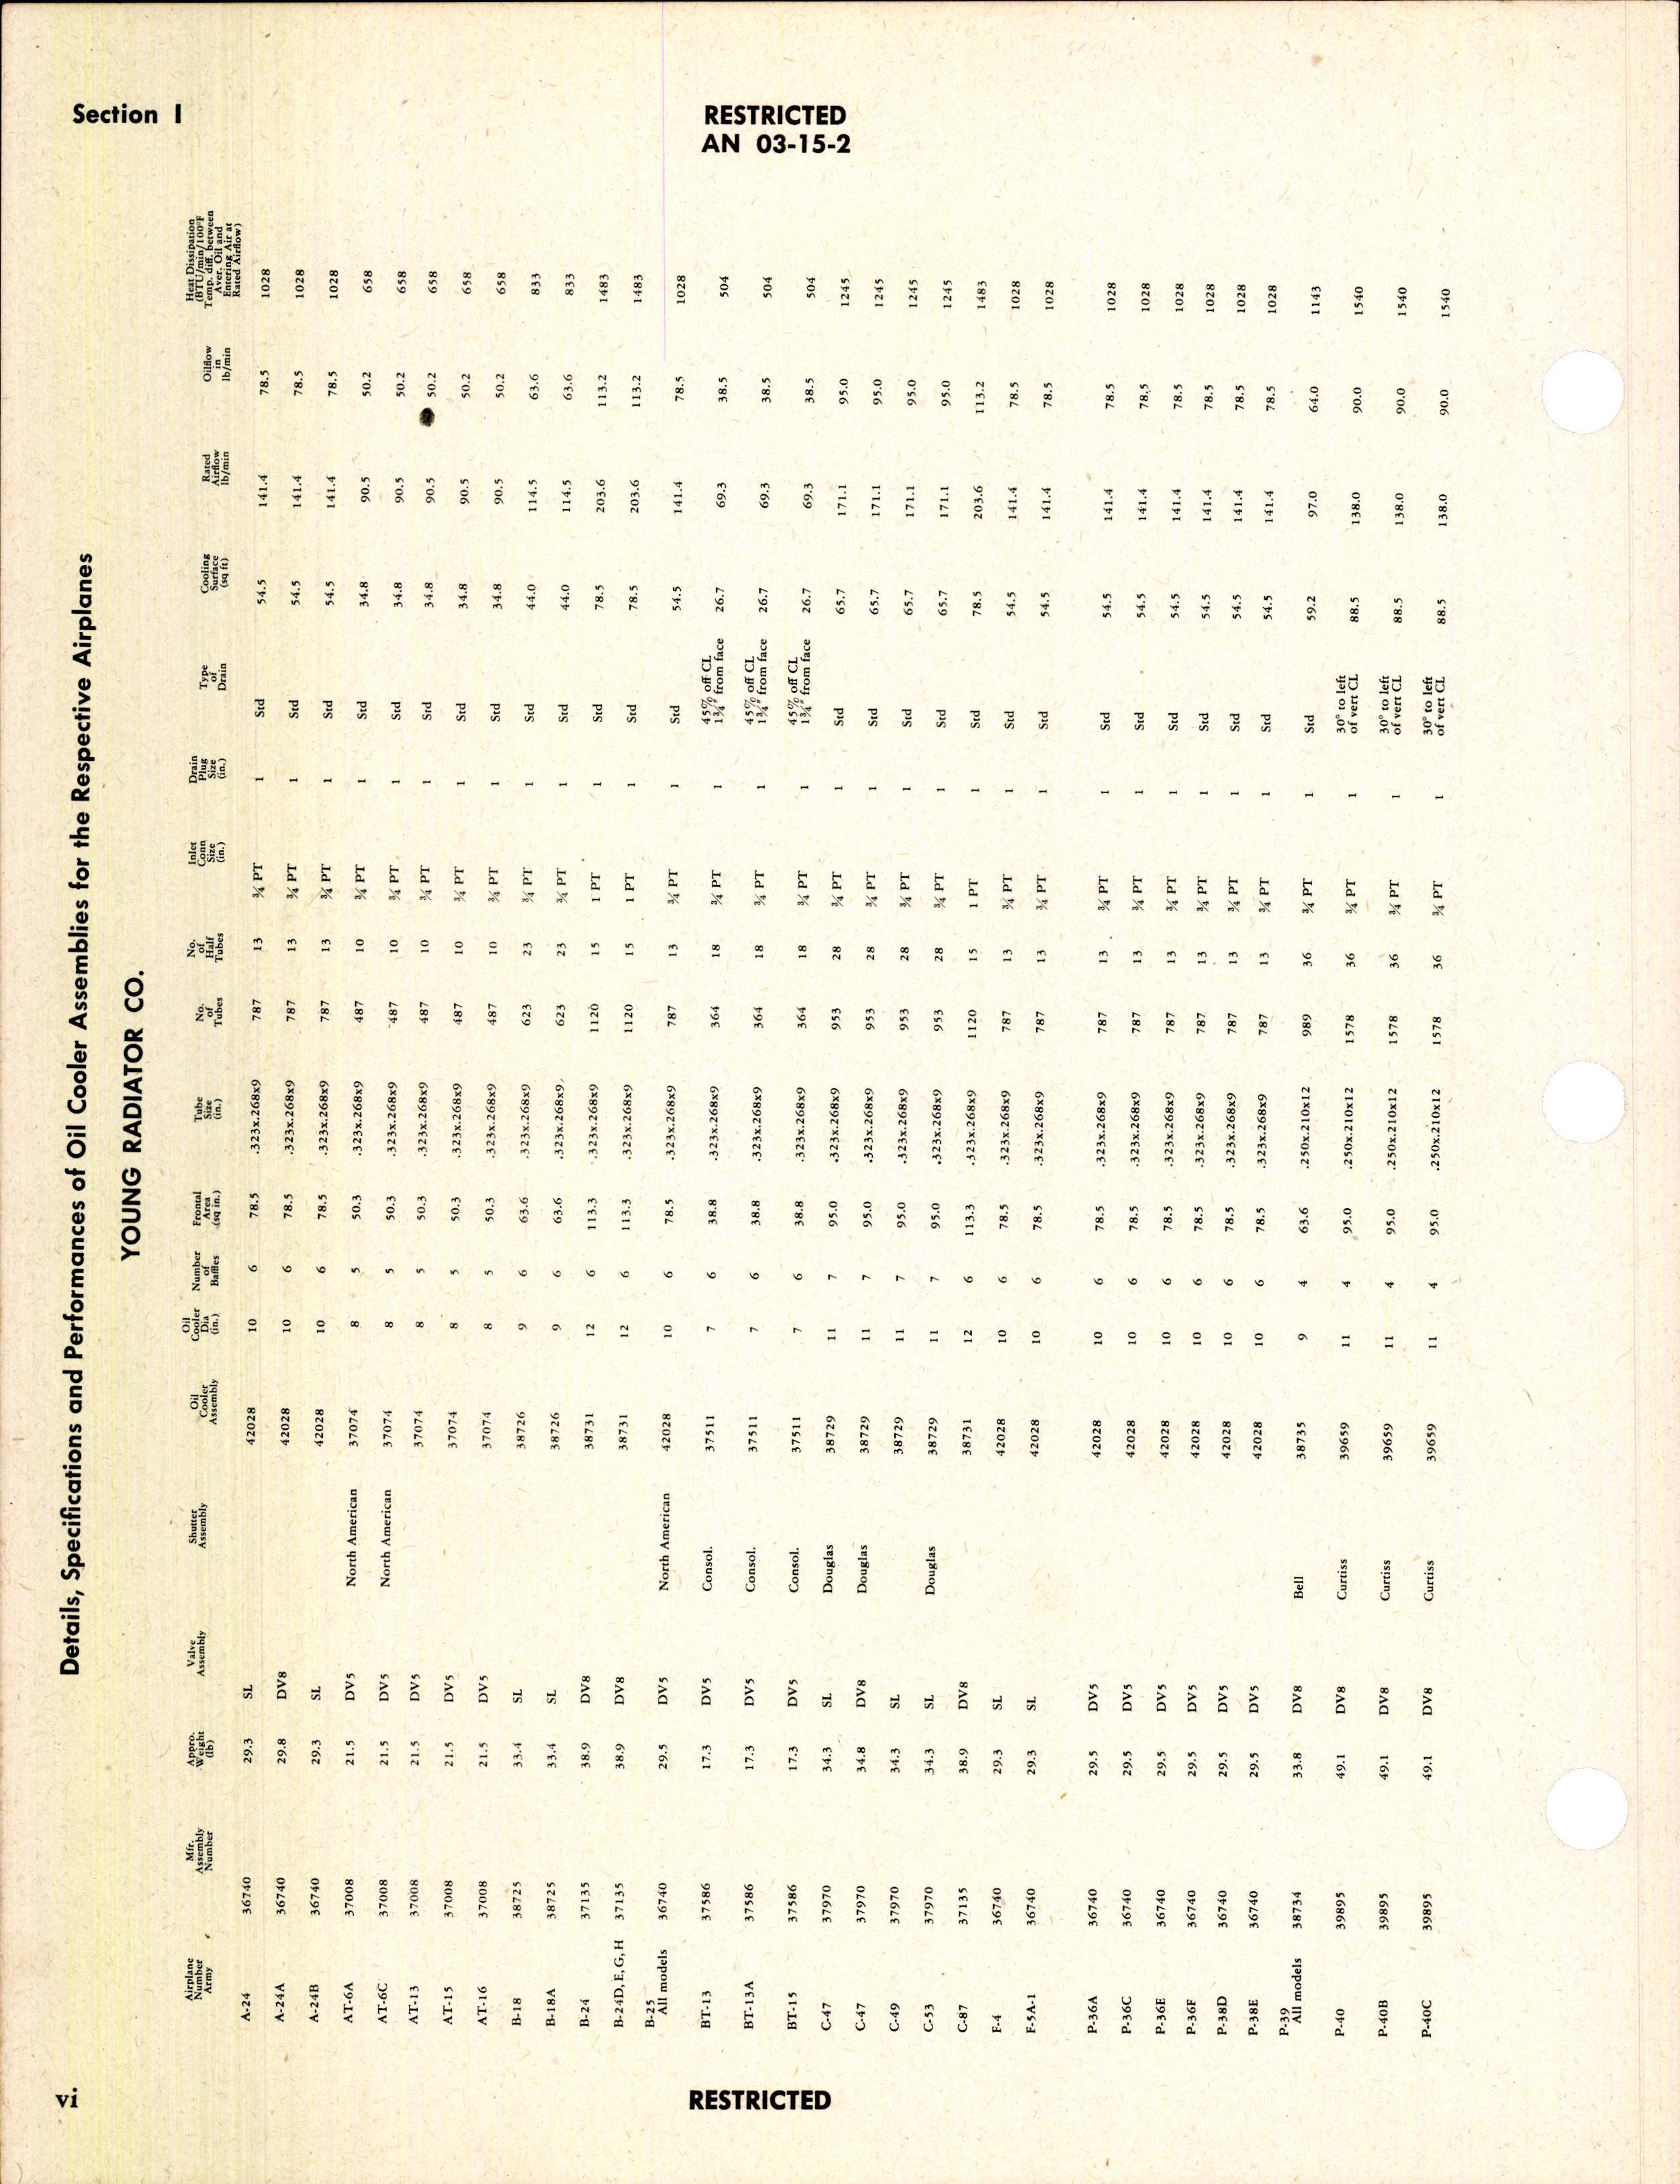 Sample page 8 from AirCorps Library document: Handbook of Instructions with Parts Catalog for Oil Coolers and Control Valves